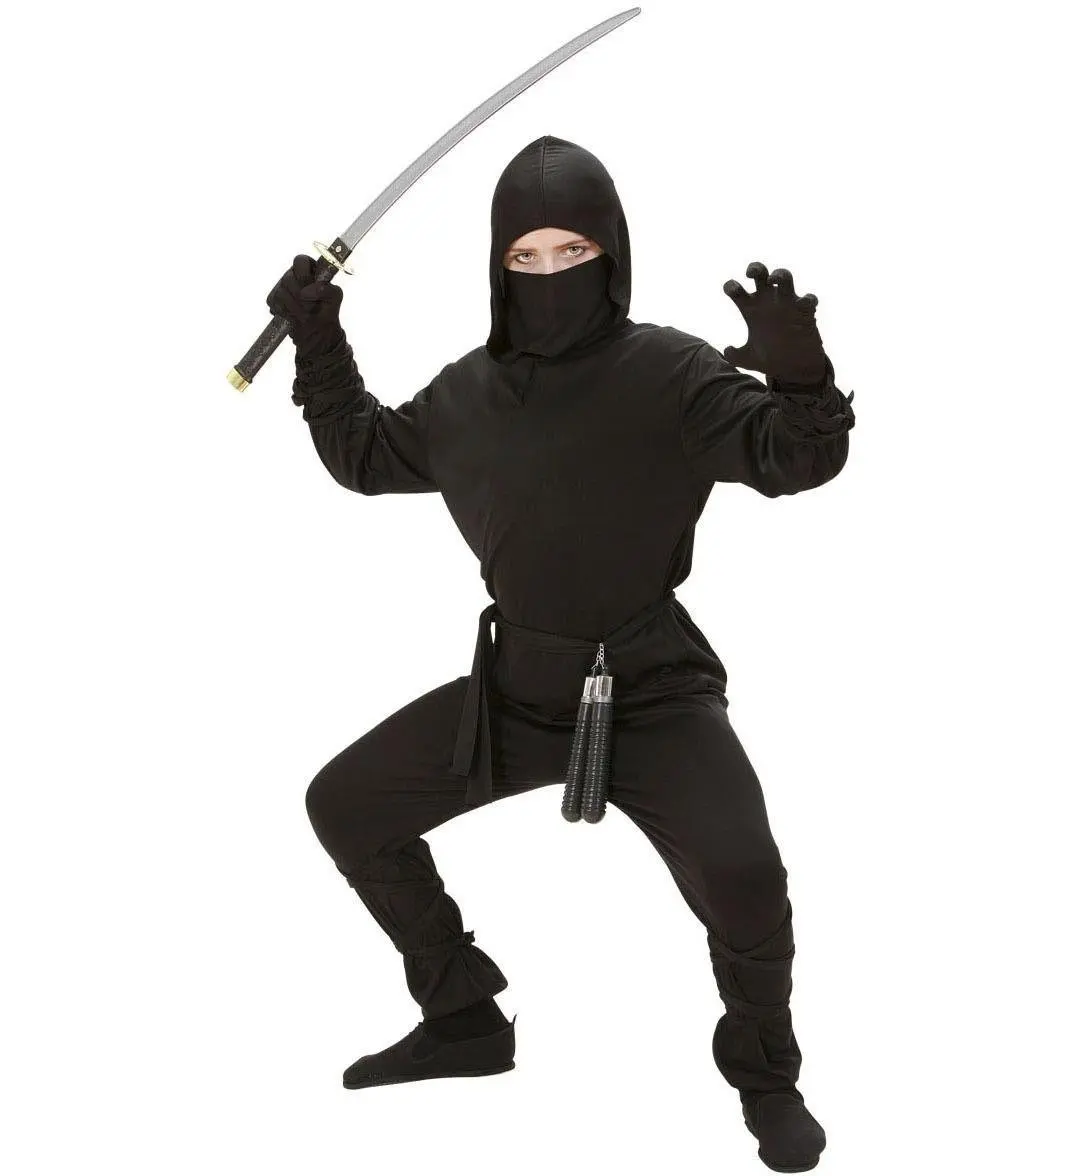 Boys Ninja Costume Outfit for Oriental Chinese Fancy Dress. 